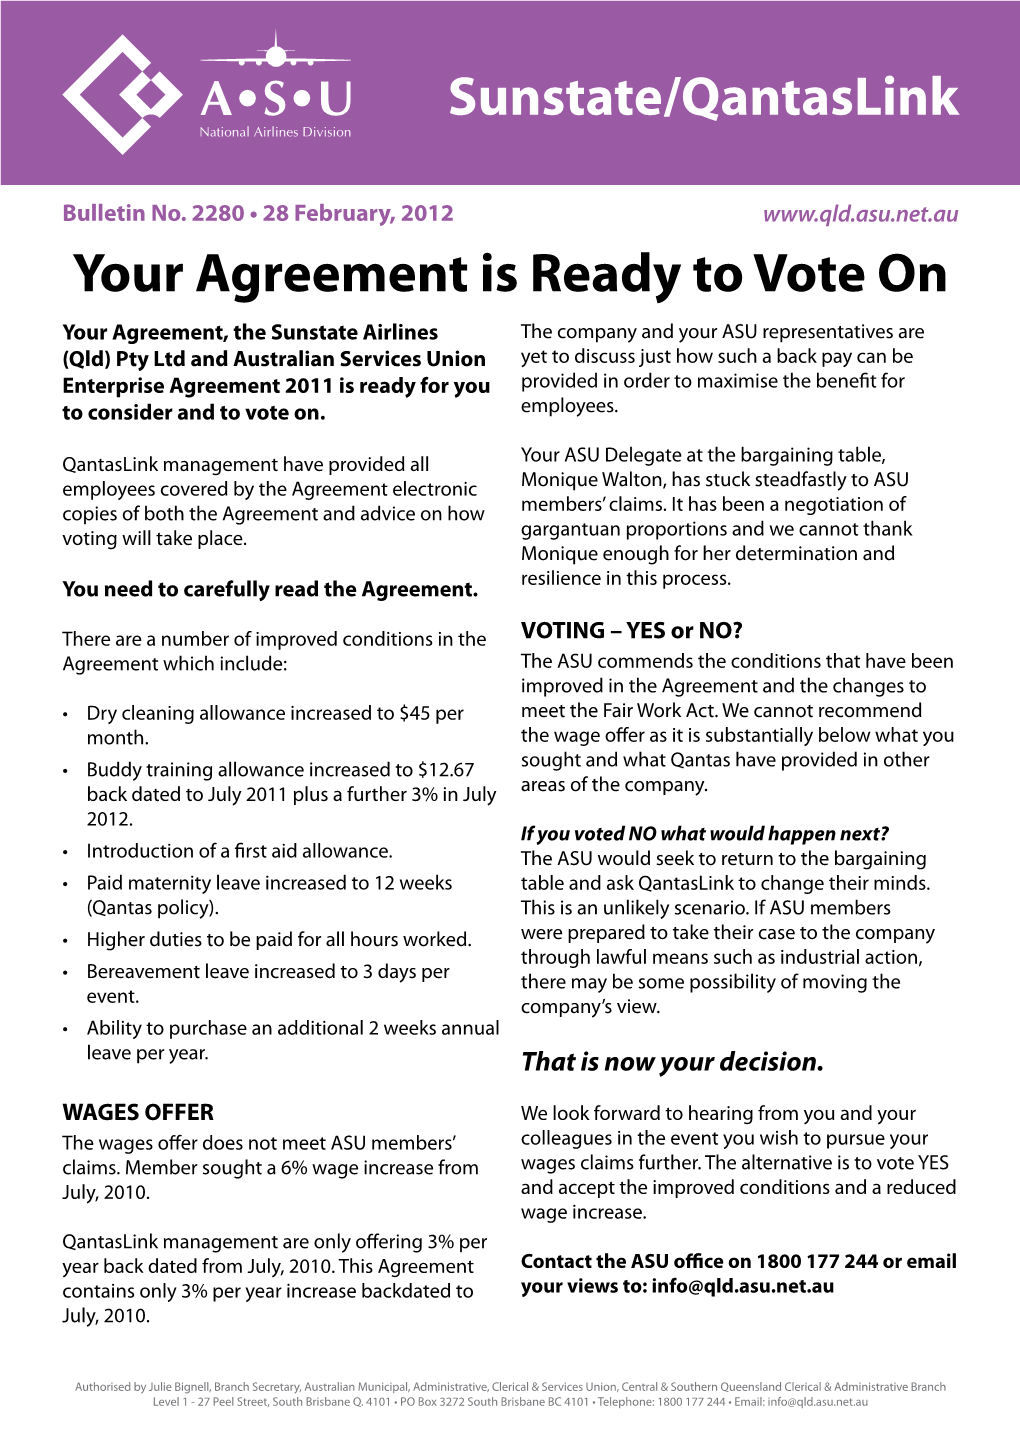 Sunstate/Qantaslink Your Agreement Is Ready to Vote On